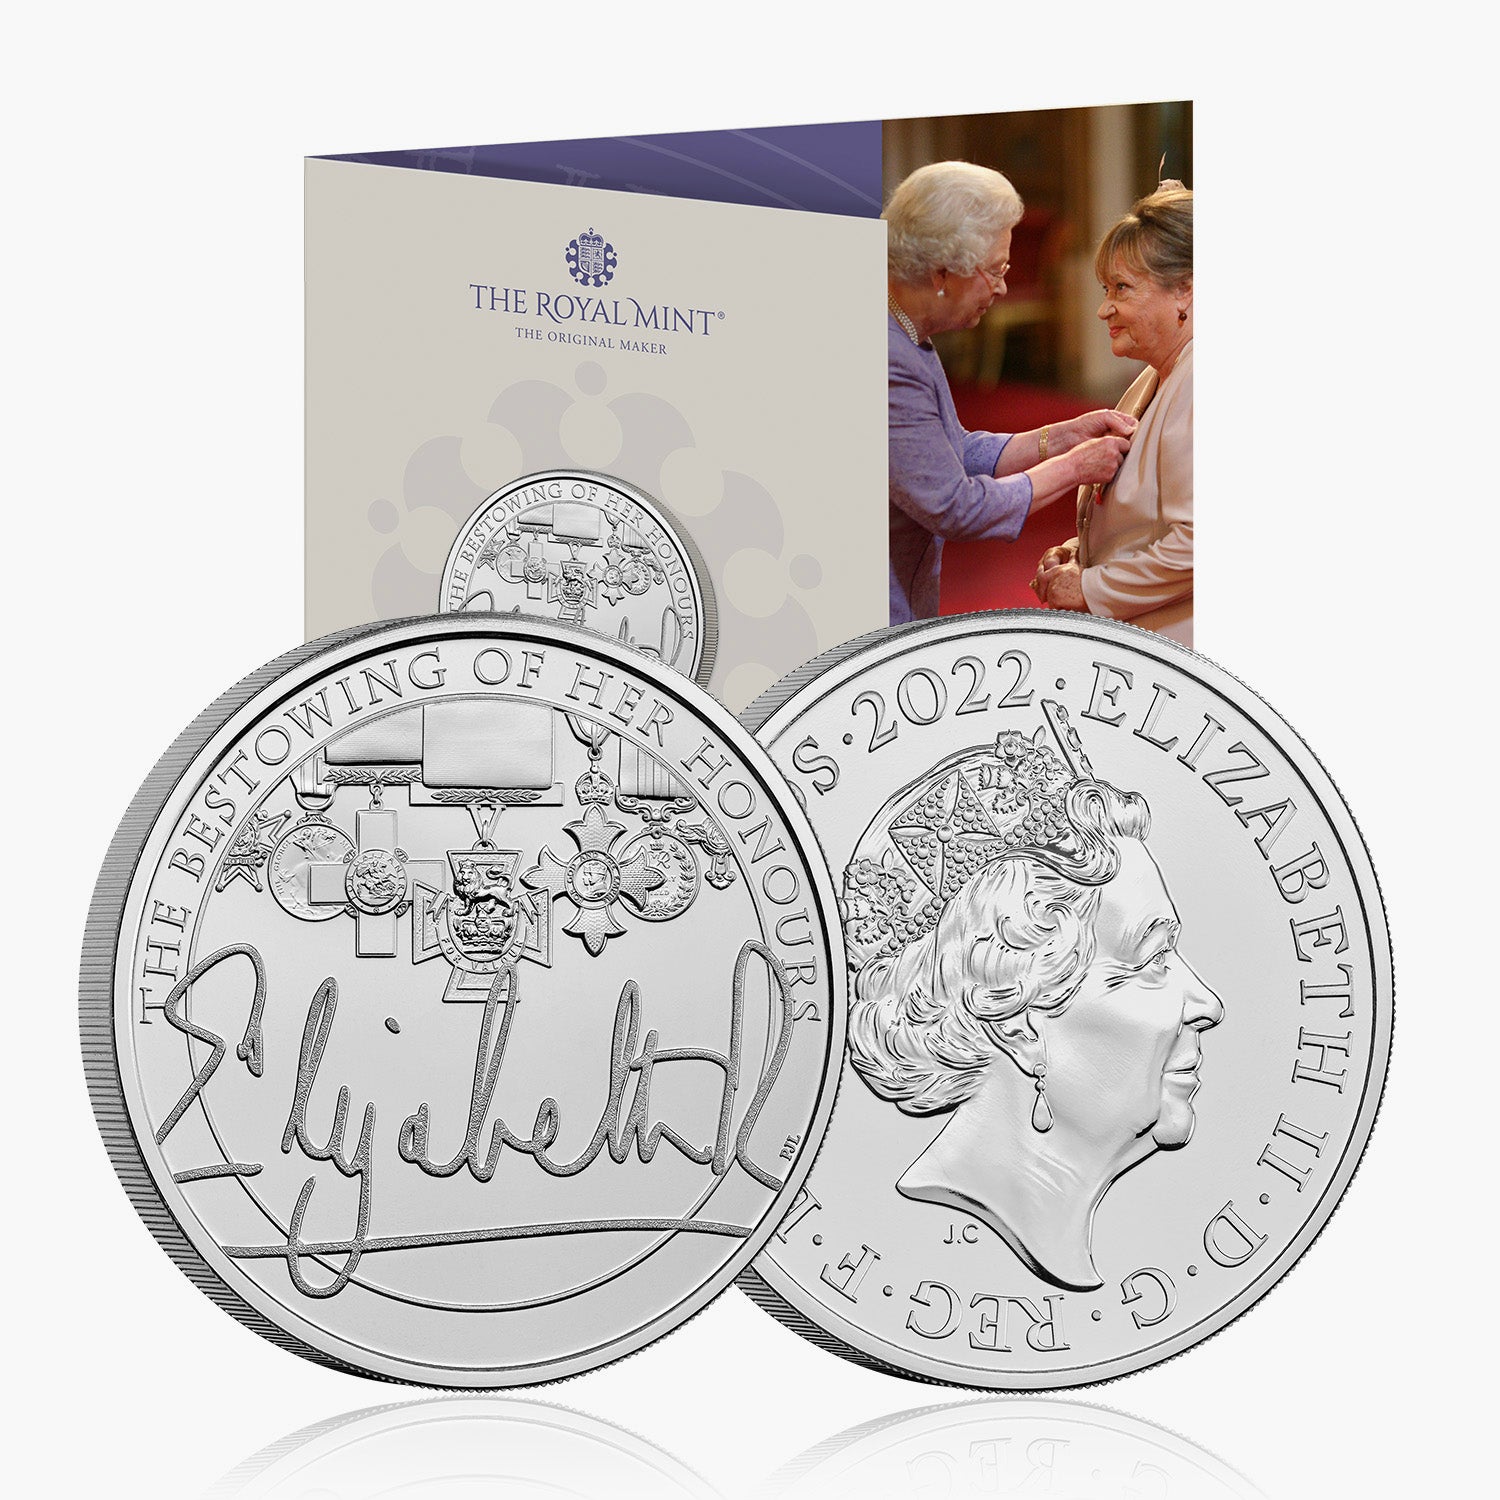 The Queen's Reign Honours and Investitures 2022 UK £5 BU Coin